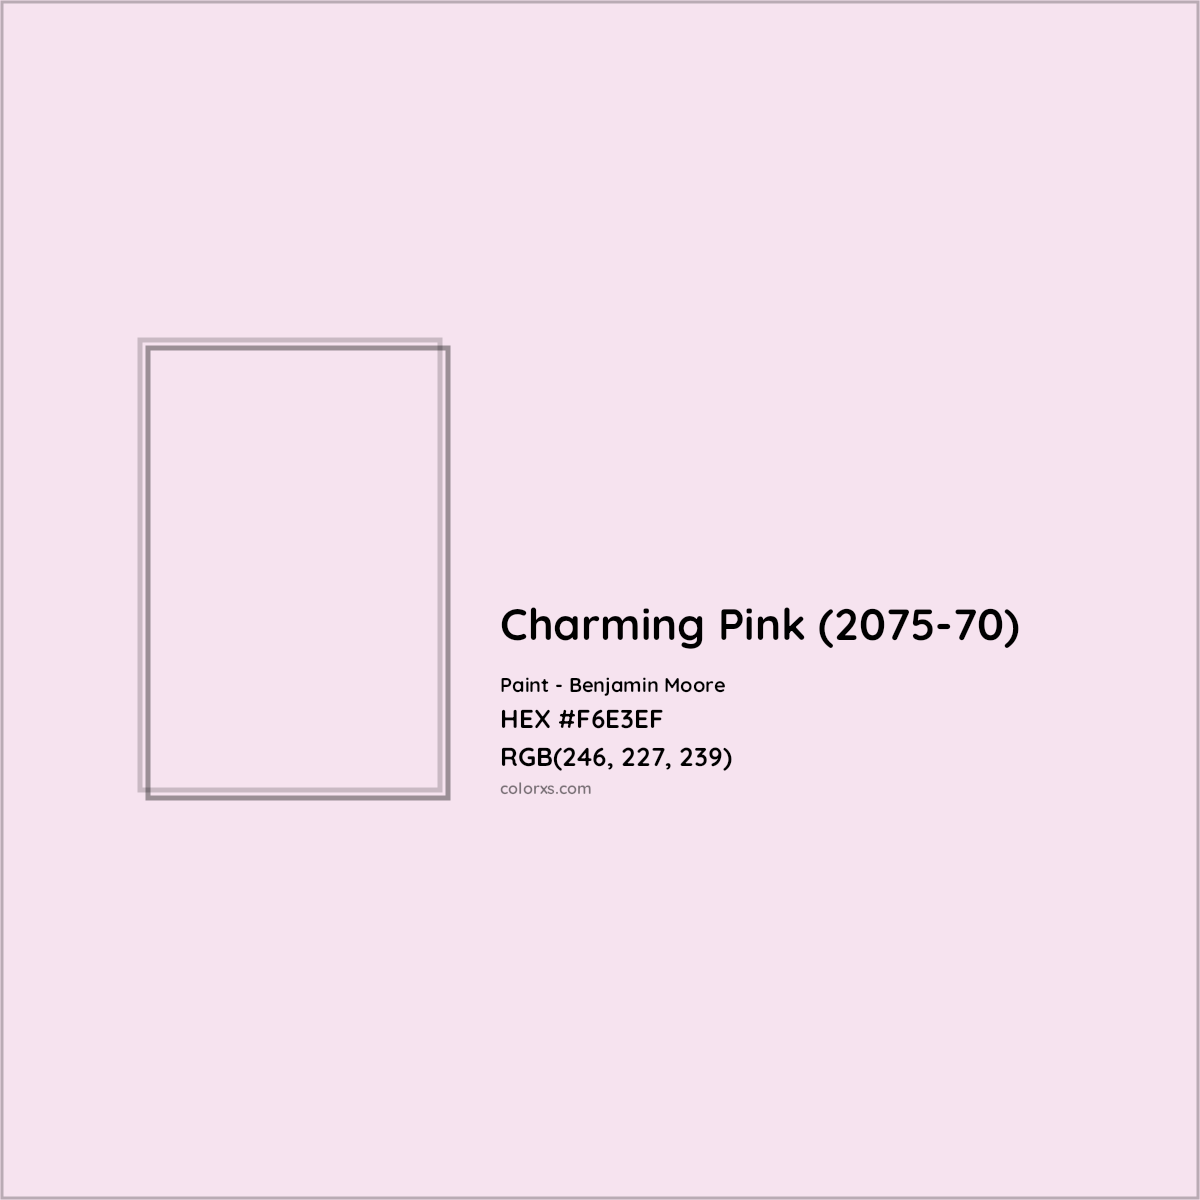 HEX #F6E3EF Charming Pink (2075-70) Paint Benjamin Moore - Color Code